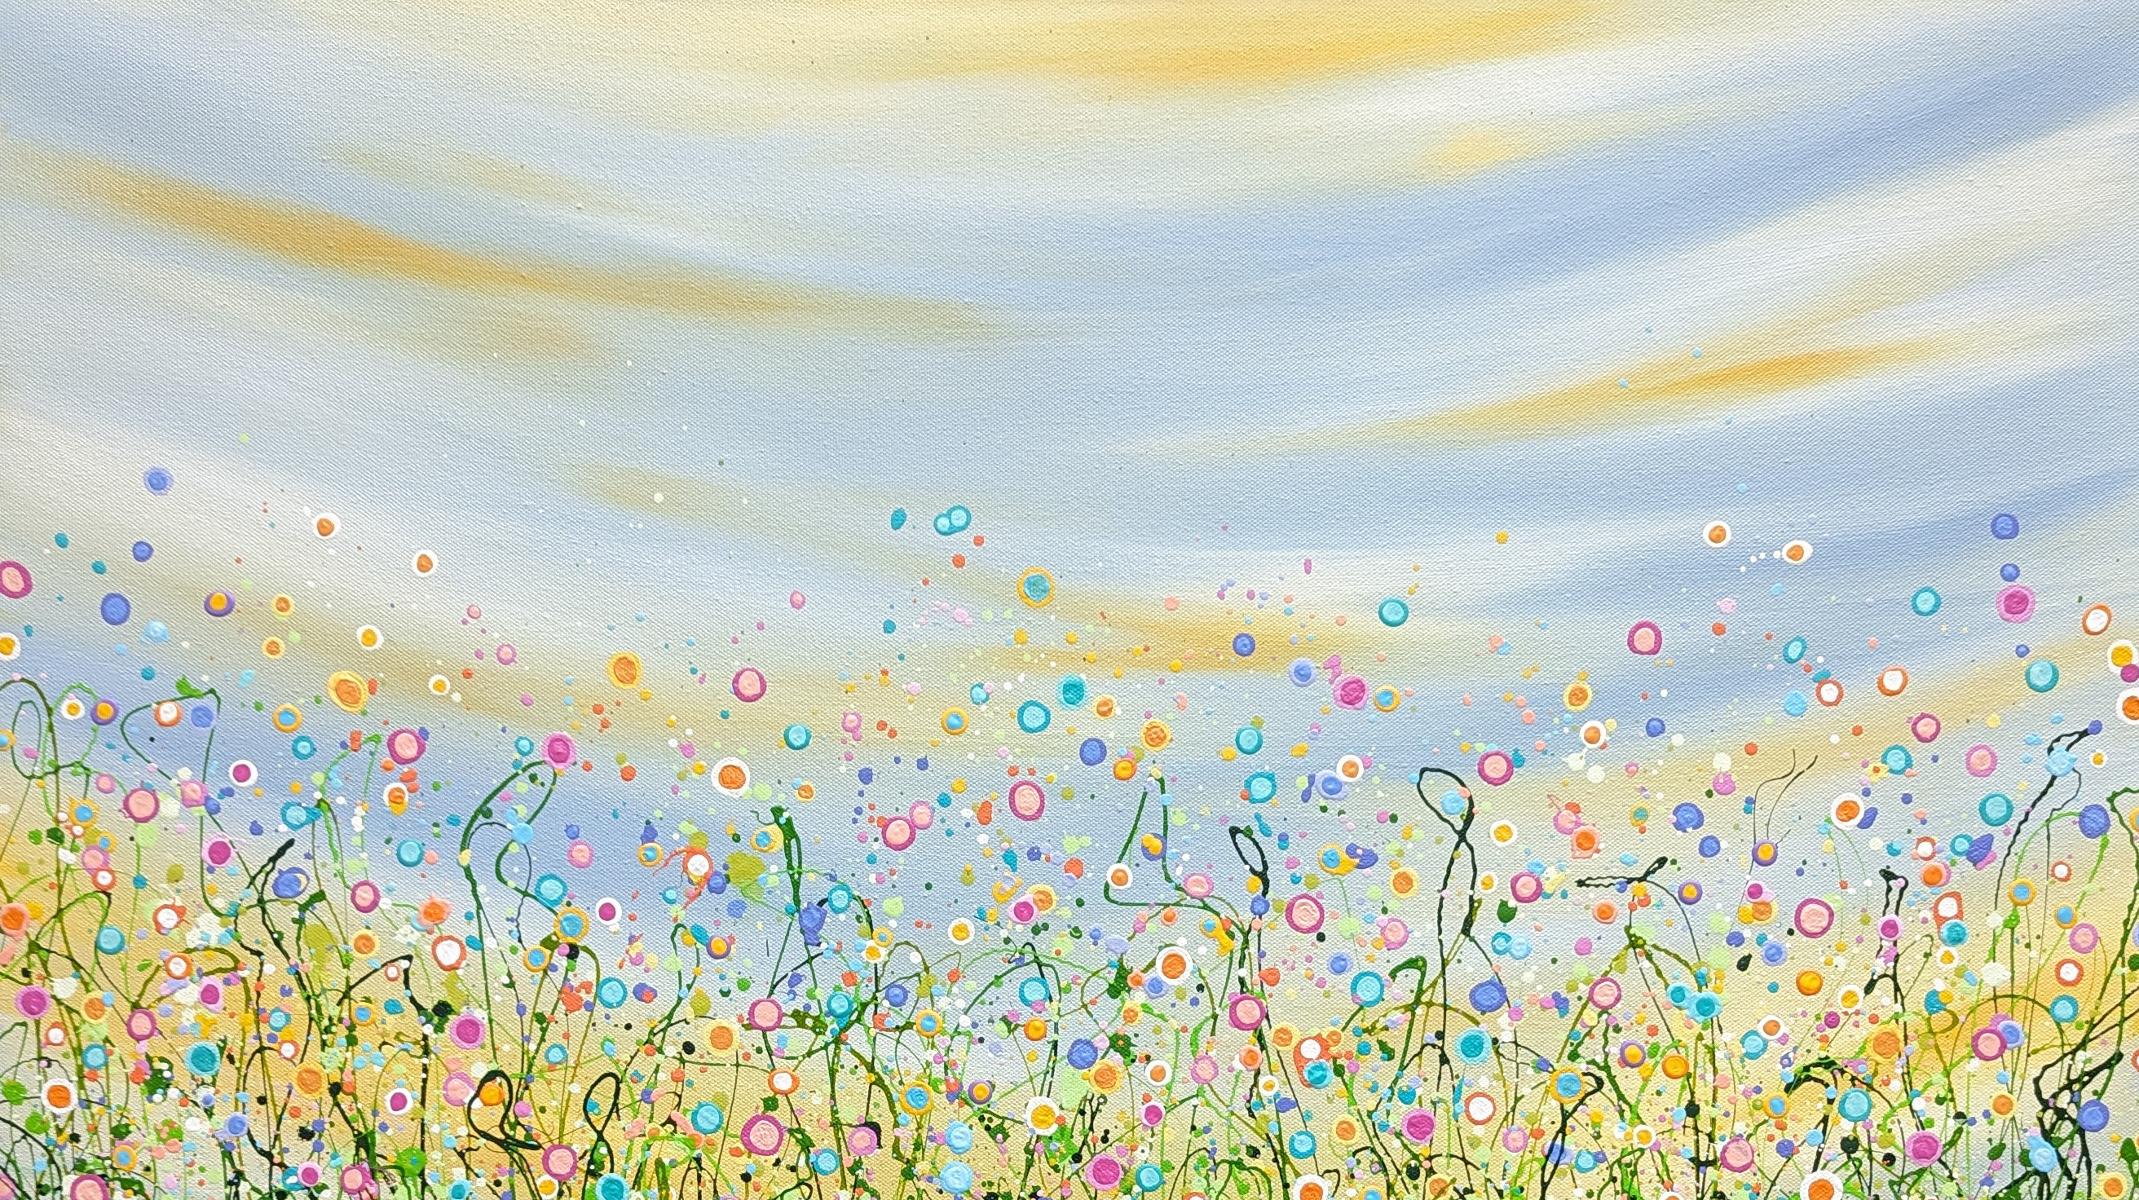 Summer Sprinkles - An Original semi-abstract painting by Lucy Moore. Using her signature string grass technique and a colourful palette Lucy has created a semi-abstract twist to her classic meadow paintings, This piece would brighten any home or